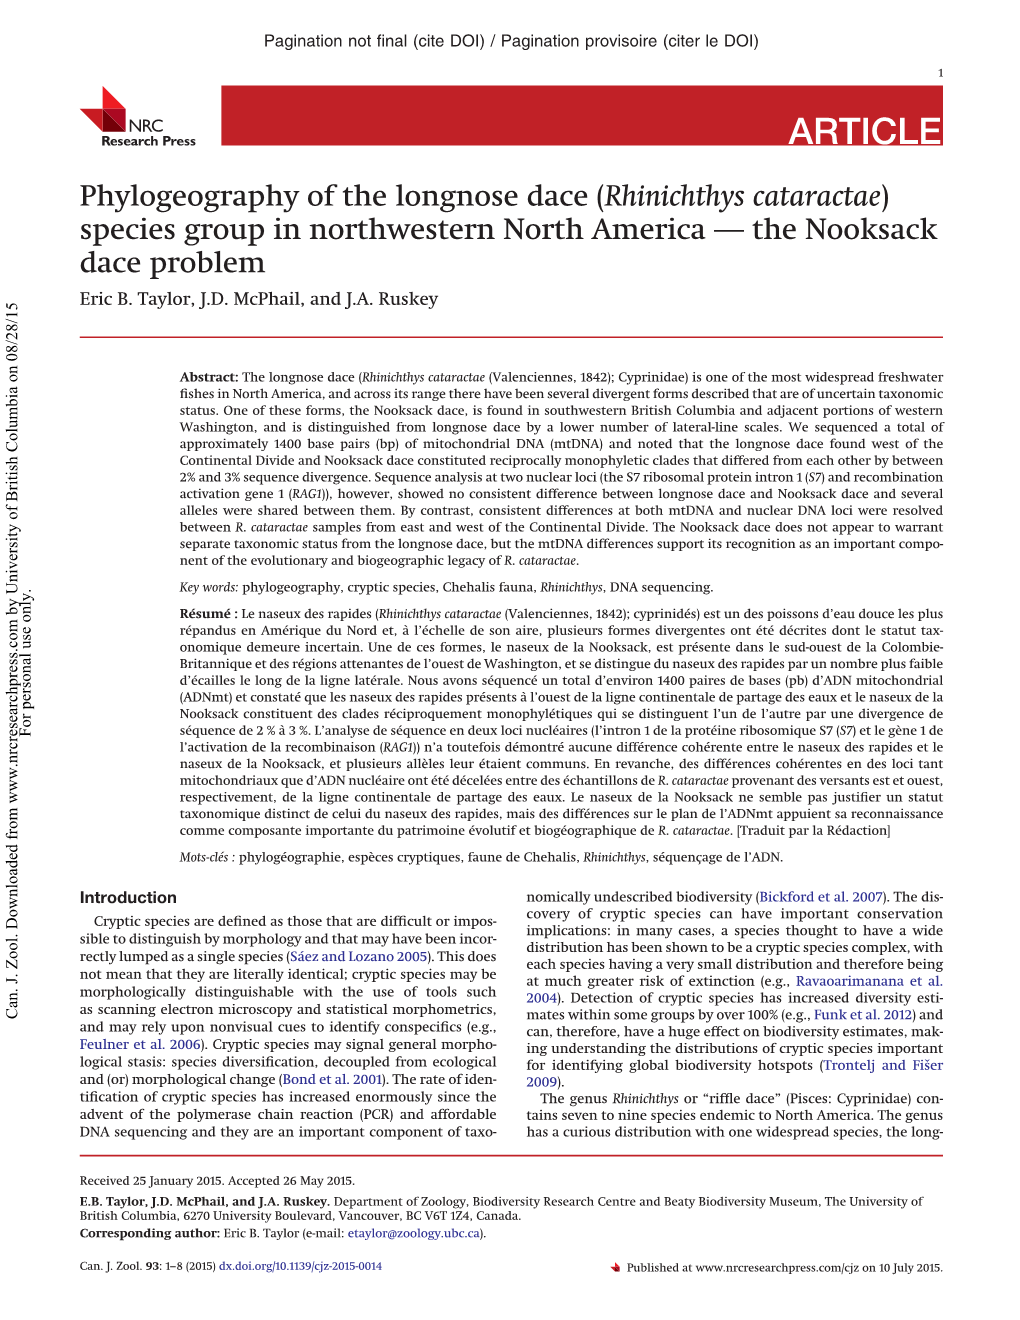 Phylogeography of the Longnose Dace (Rhinichthys Cataractae) Species Group in Northwestern North America — the Nooksack Dace Problem Eric B